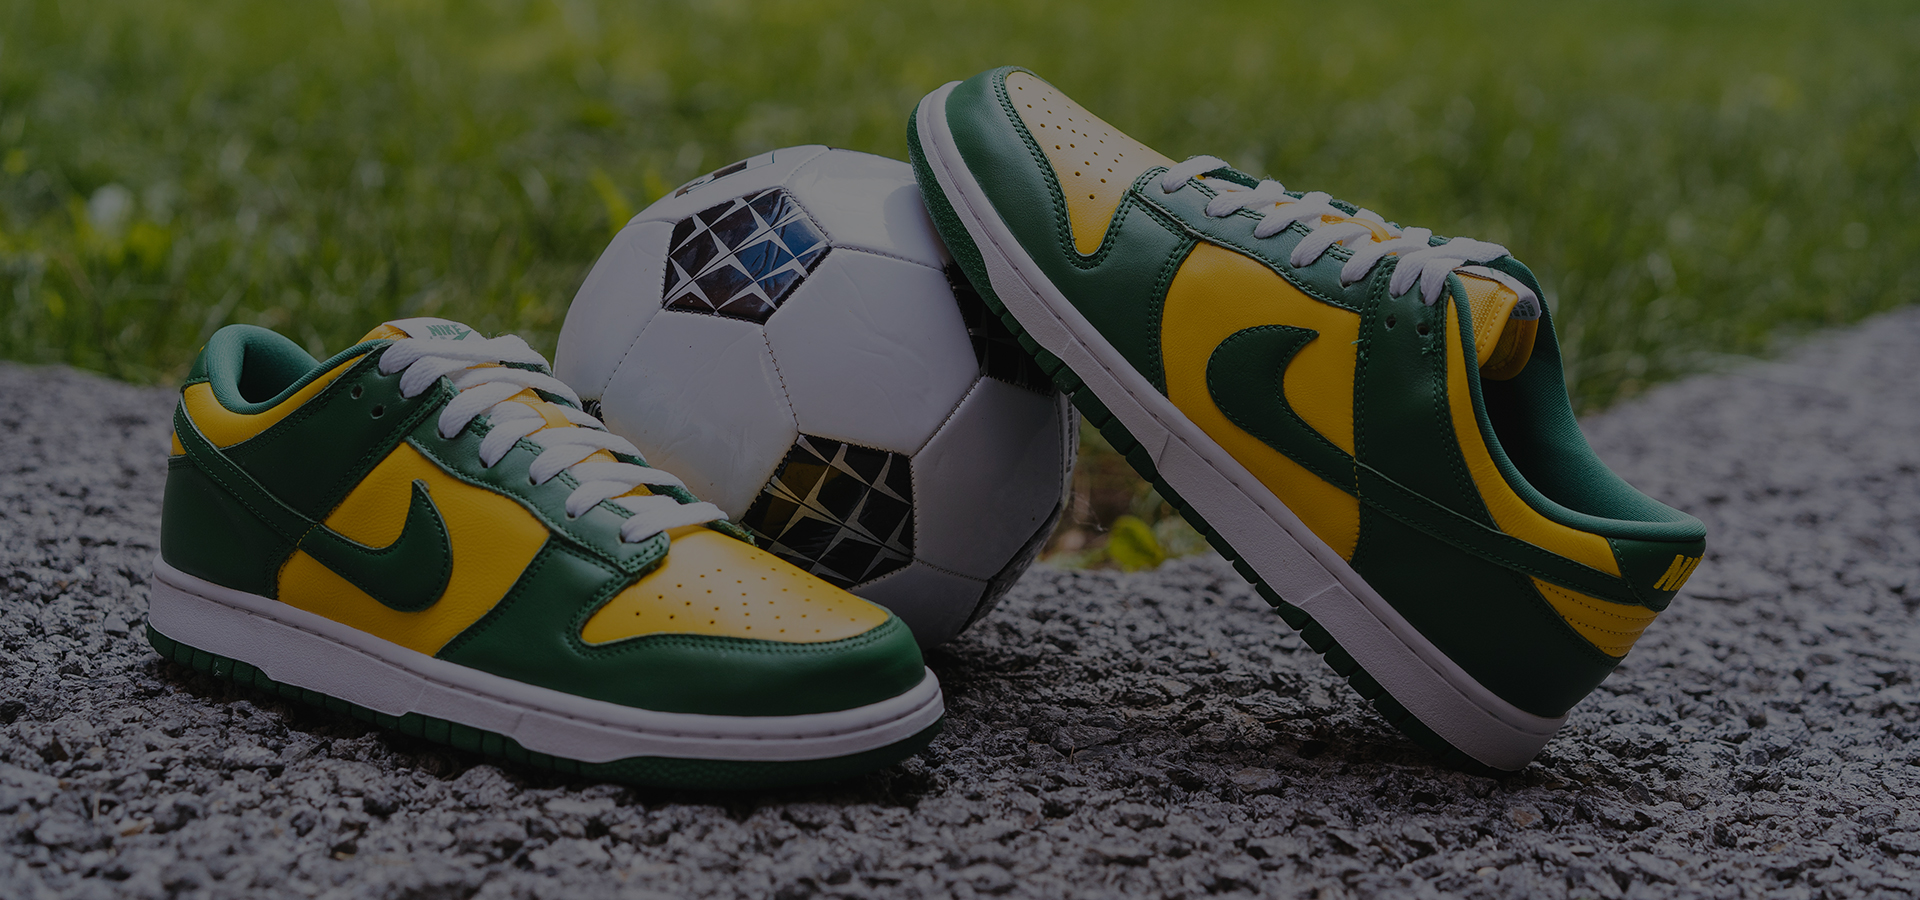 World Cup 2022 Sneaker Shopping Guide | SneakerNews.com